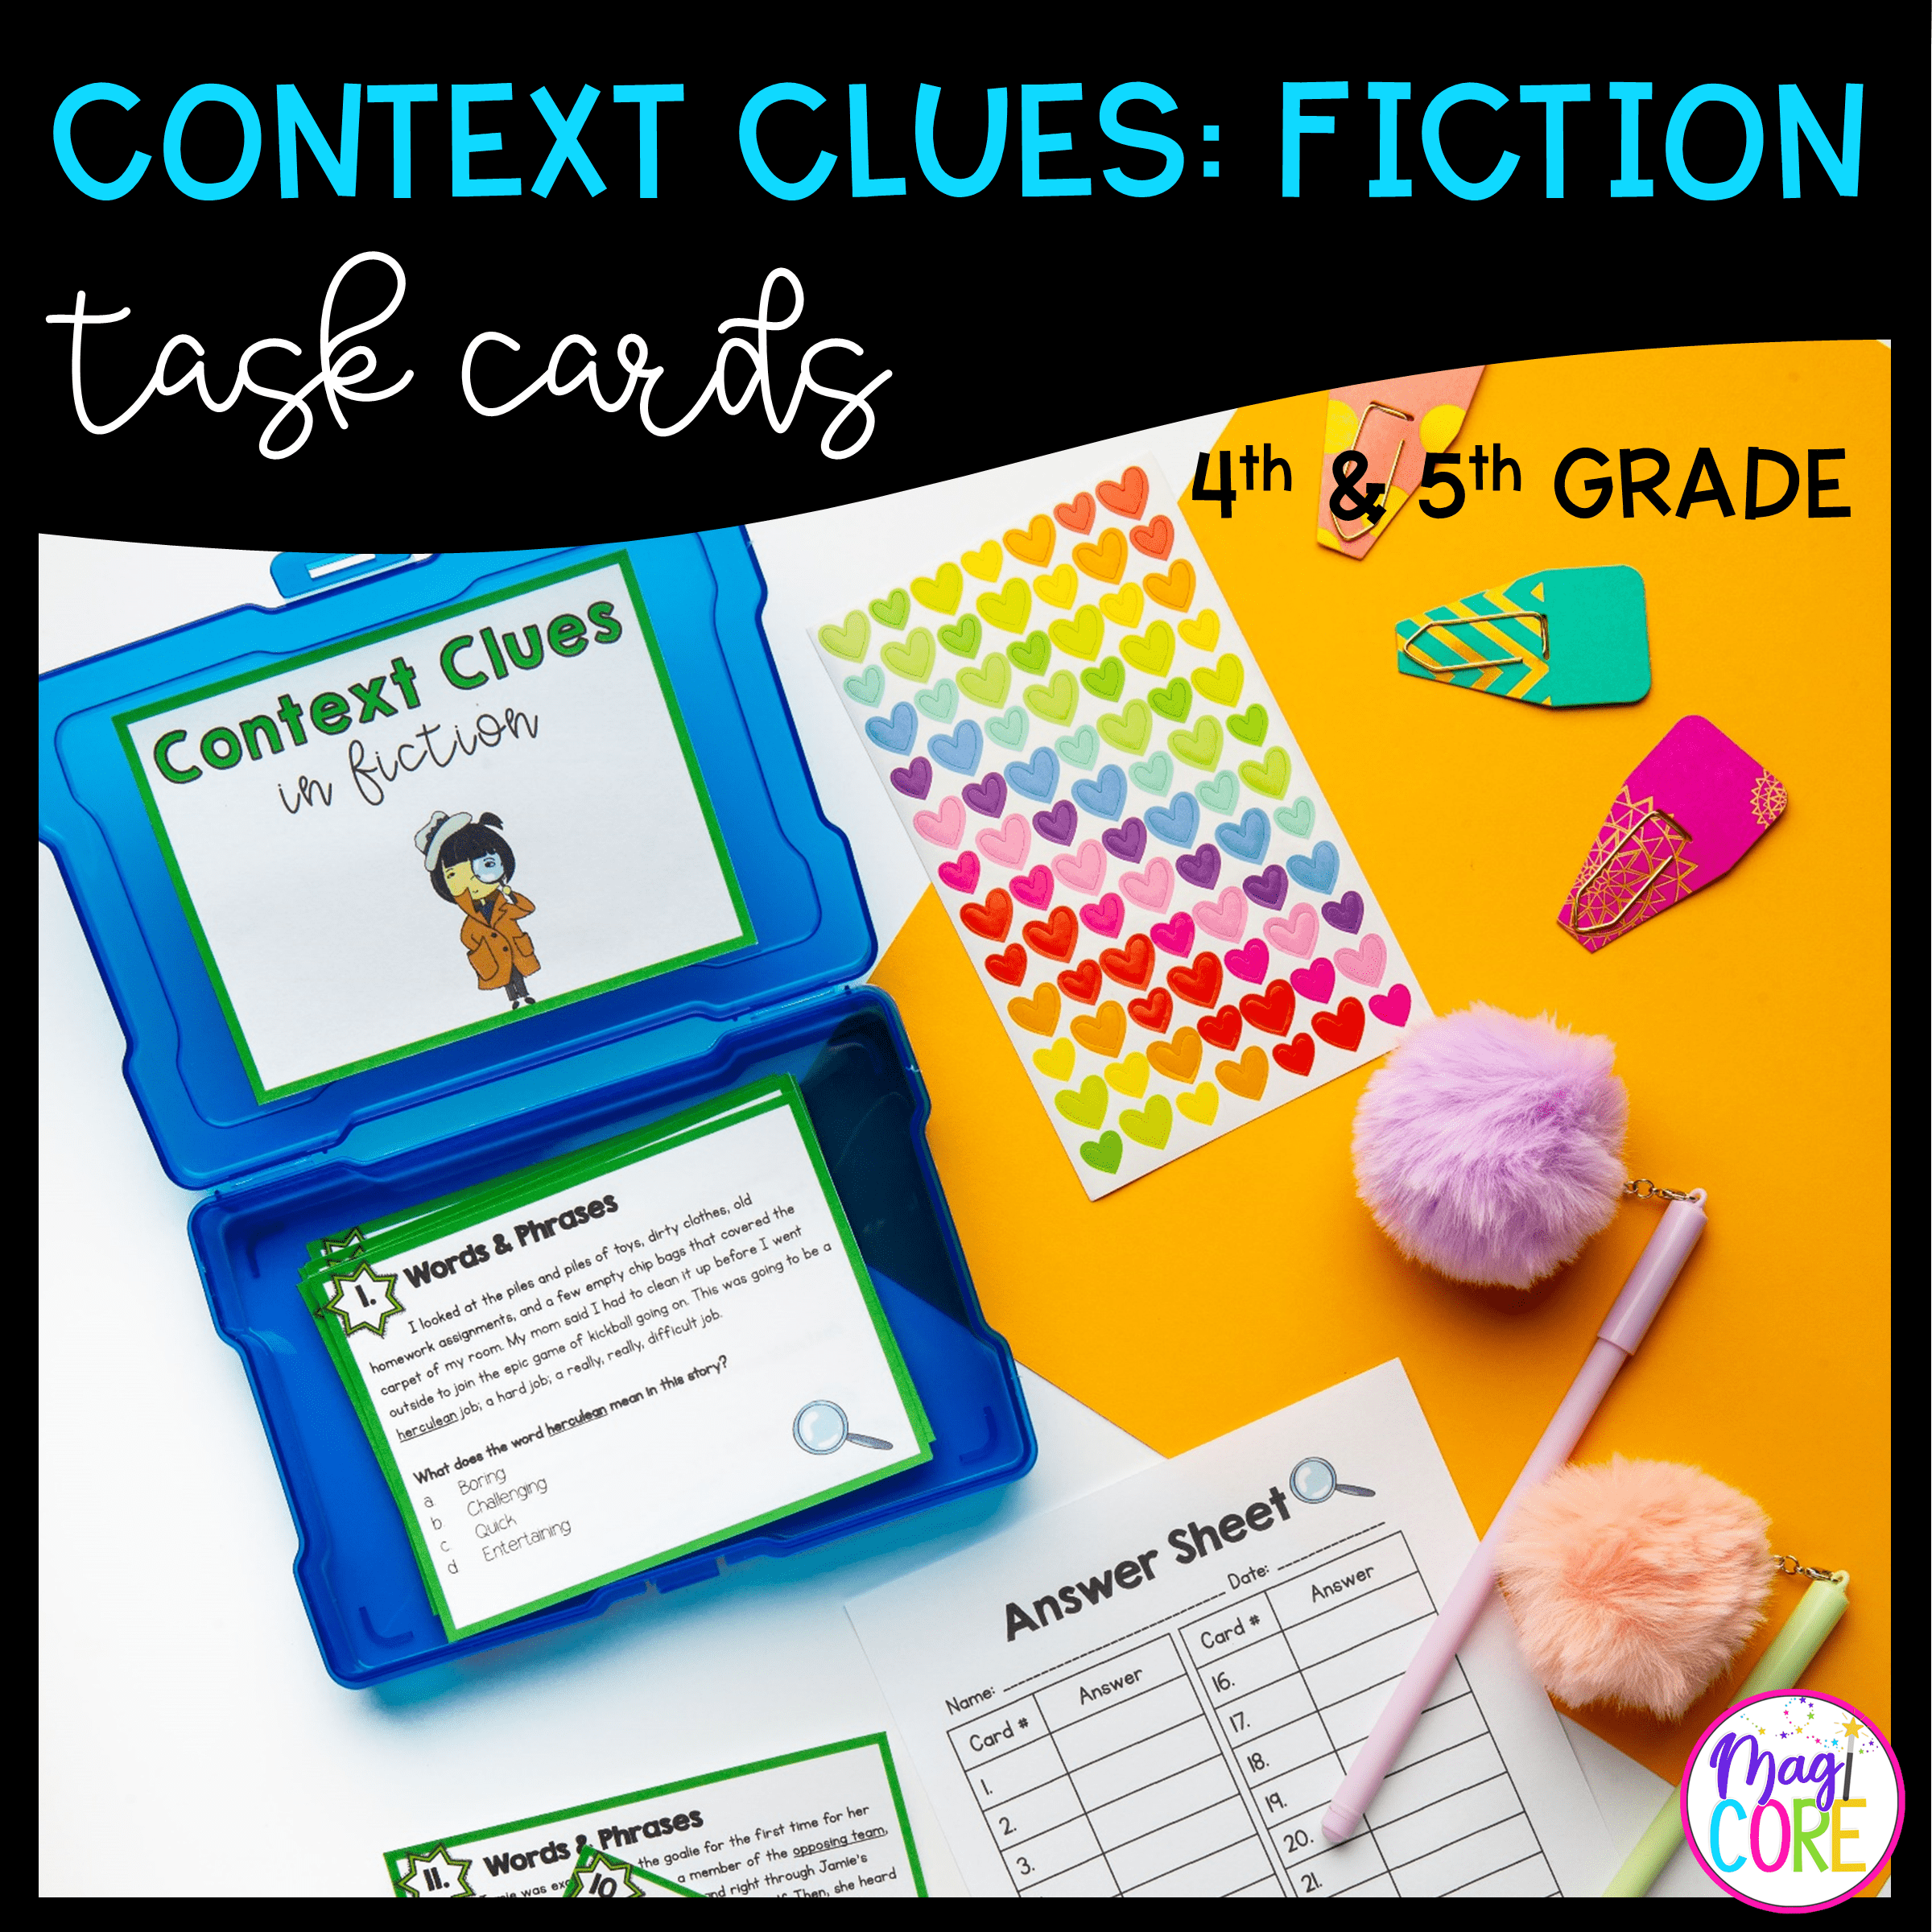 Context Clues in Fiction Task Cards - 4th & 5th Grade - RL.4.4 & RL.5.4